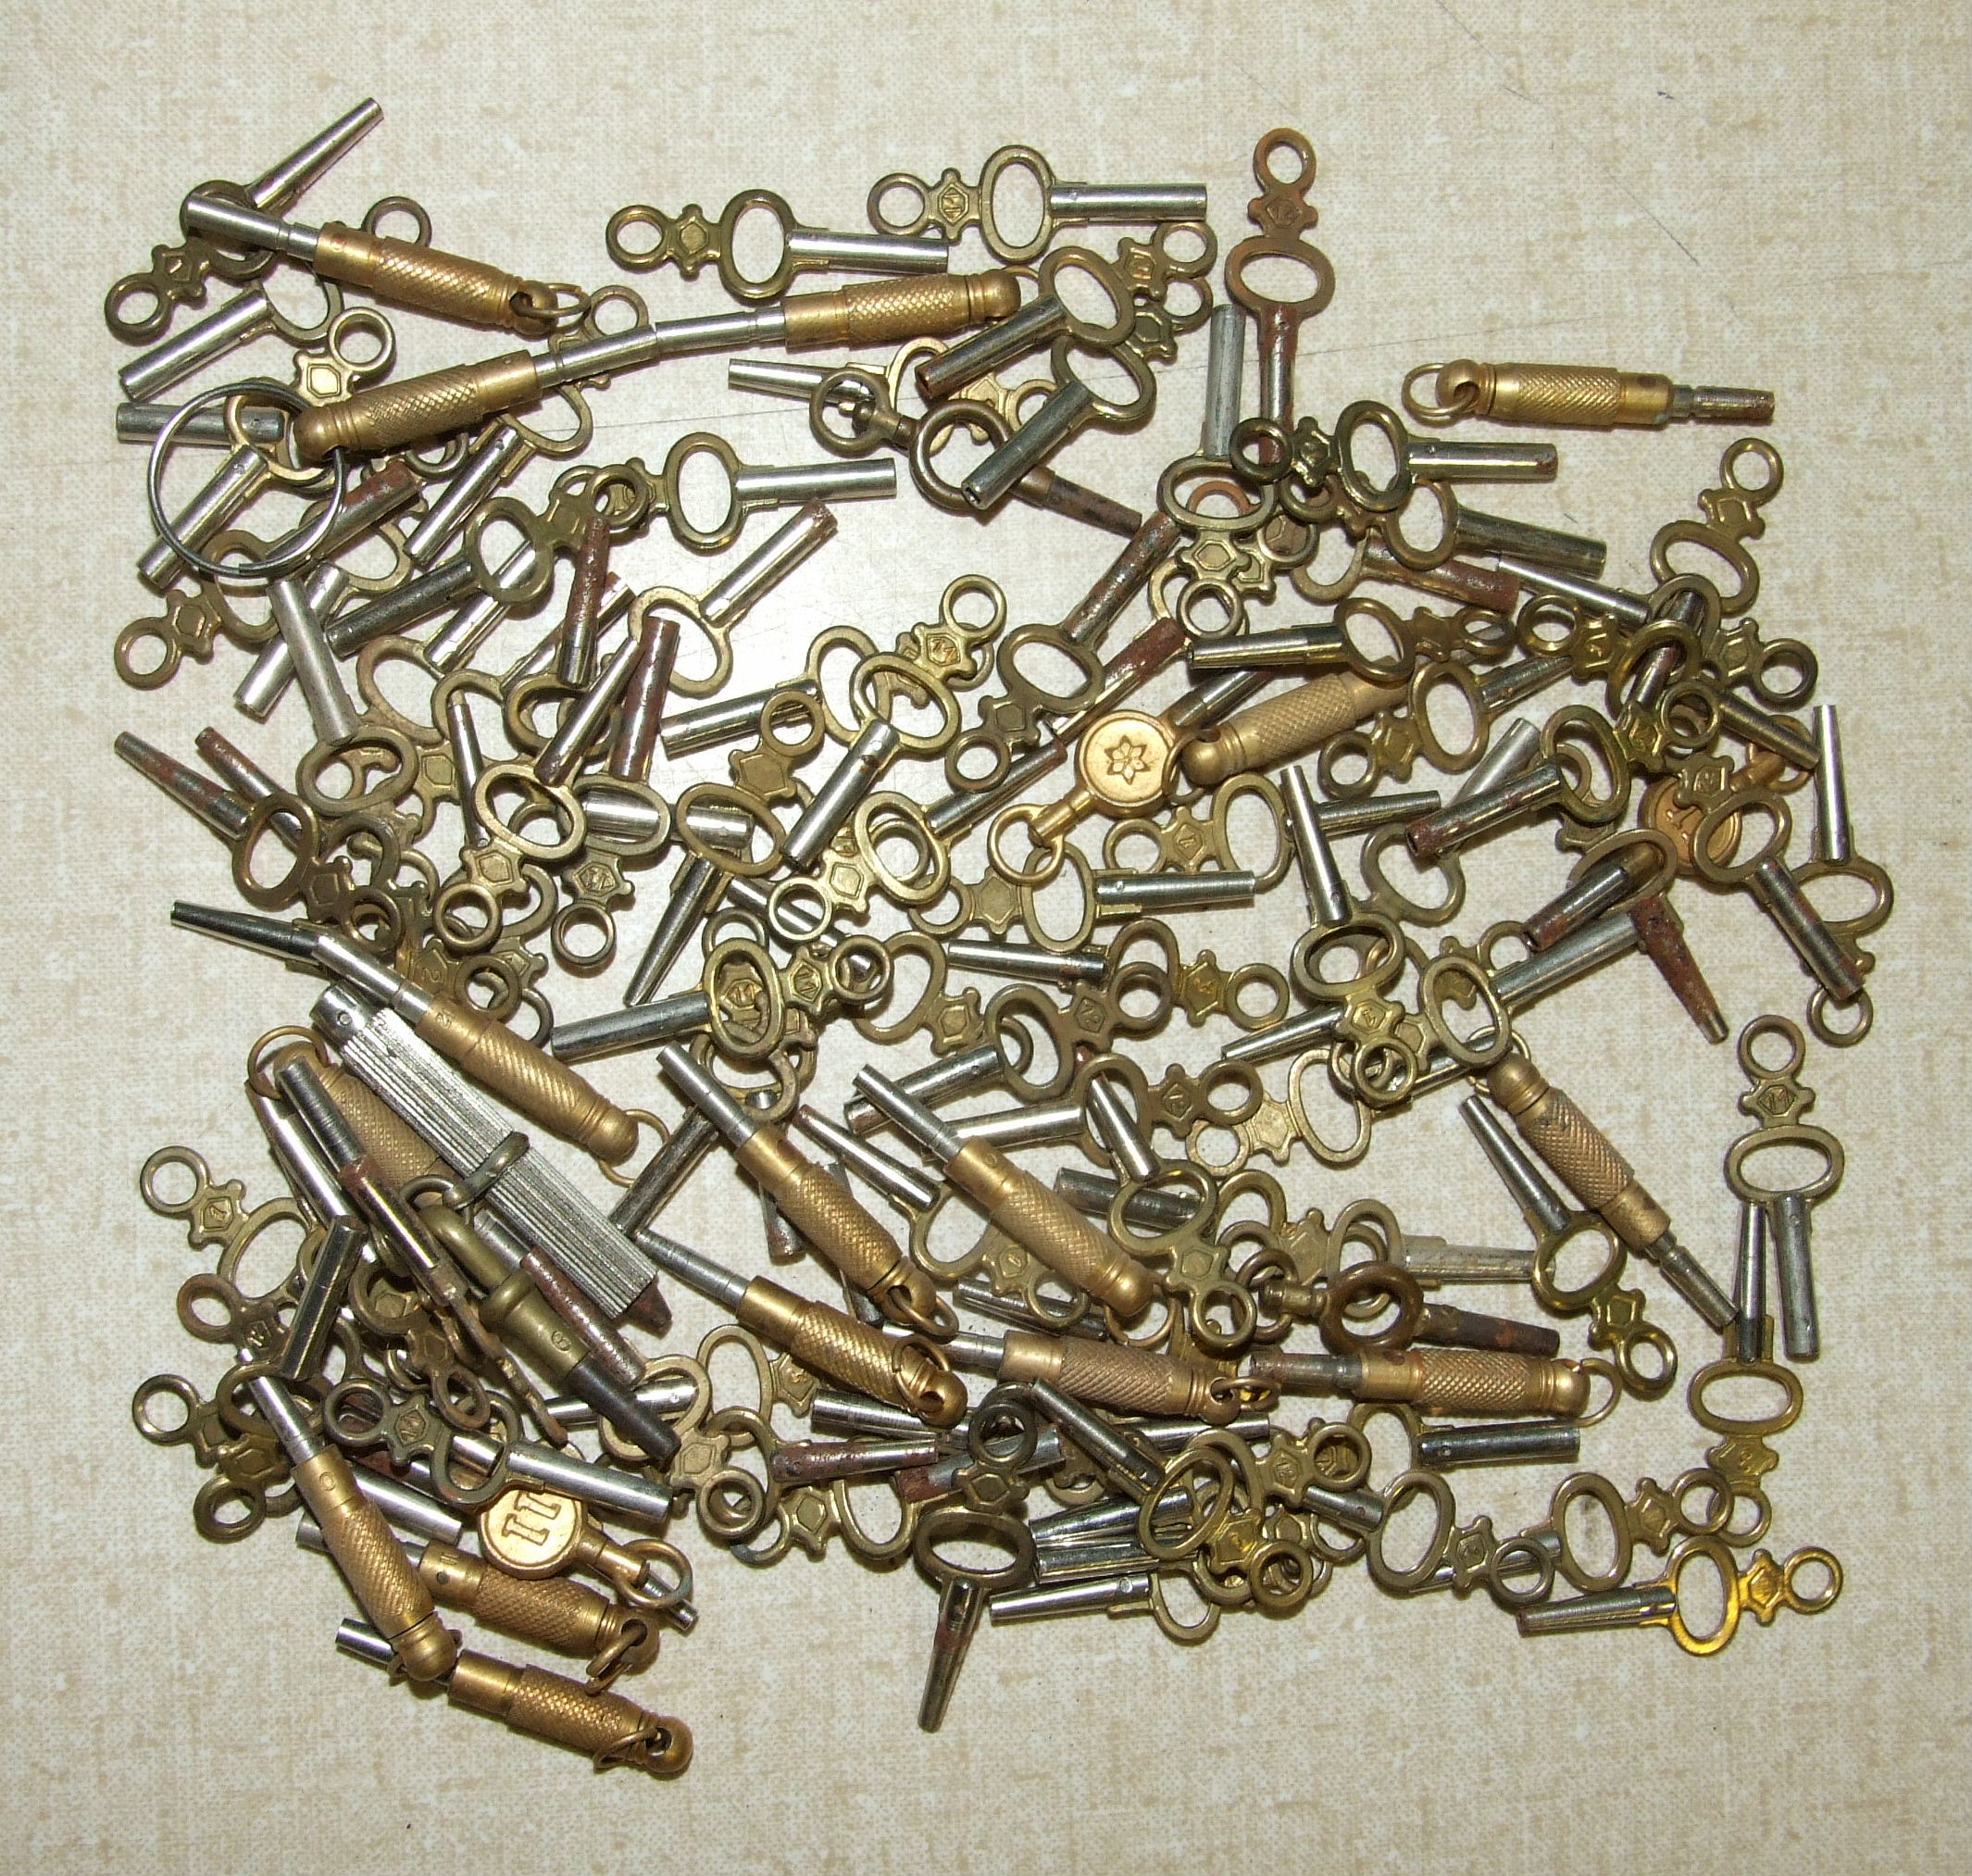 A collection of approximately one hundred and fifteen pocket watch keys.